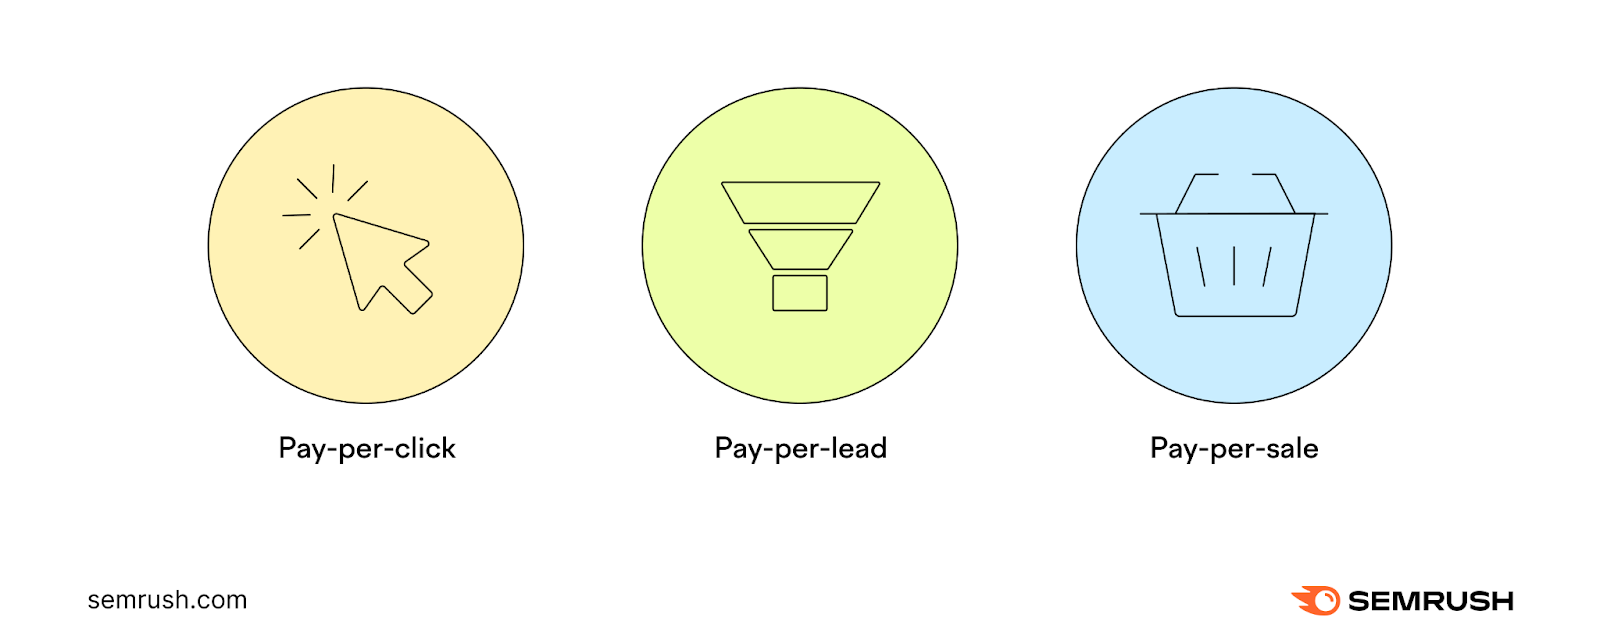 Graphic depicting pay-per-click, pay-per-lead, and pay-per sale commission structures